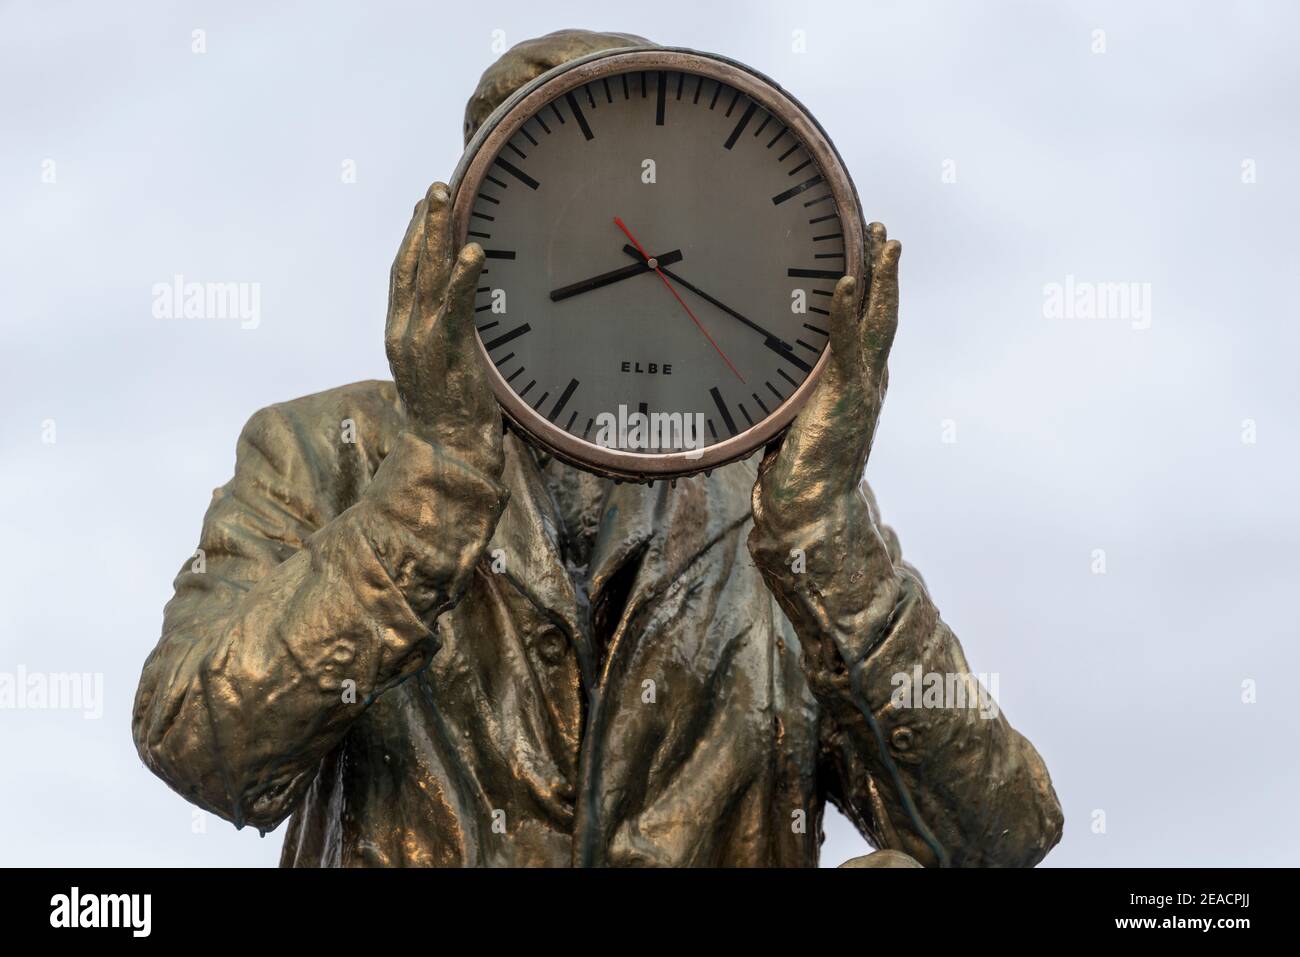 Germany, Saxony-Anhalt, Magdeburg, work of art 'The time counter', time change, clock Stock Photo